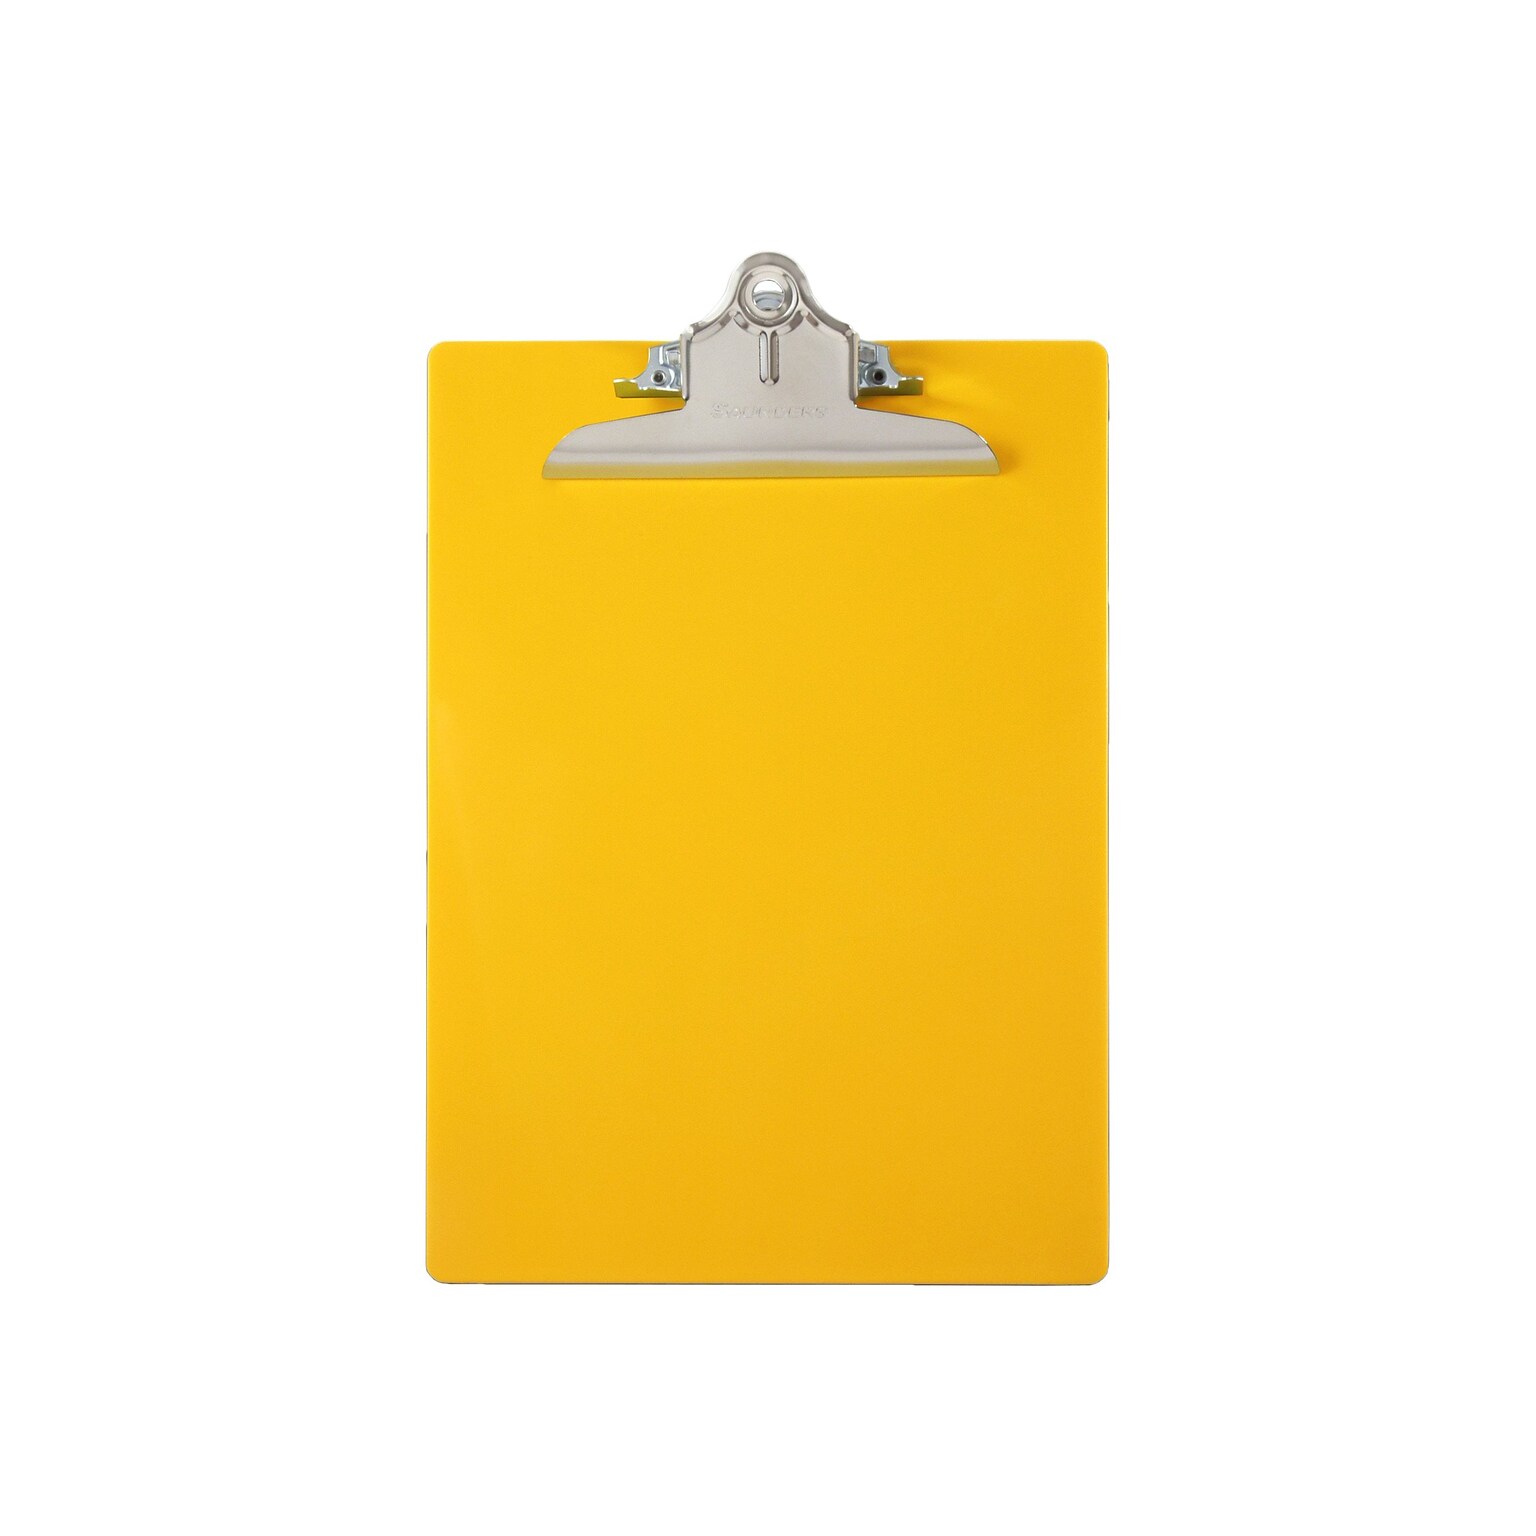 Saunders Recycled Plastic Clipboard, Letter Size, Yellow (21605)